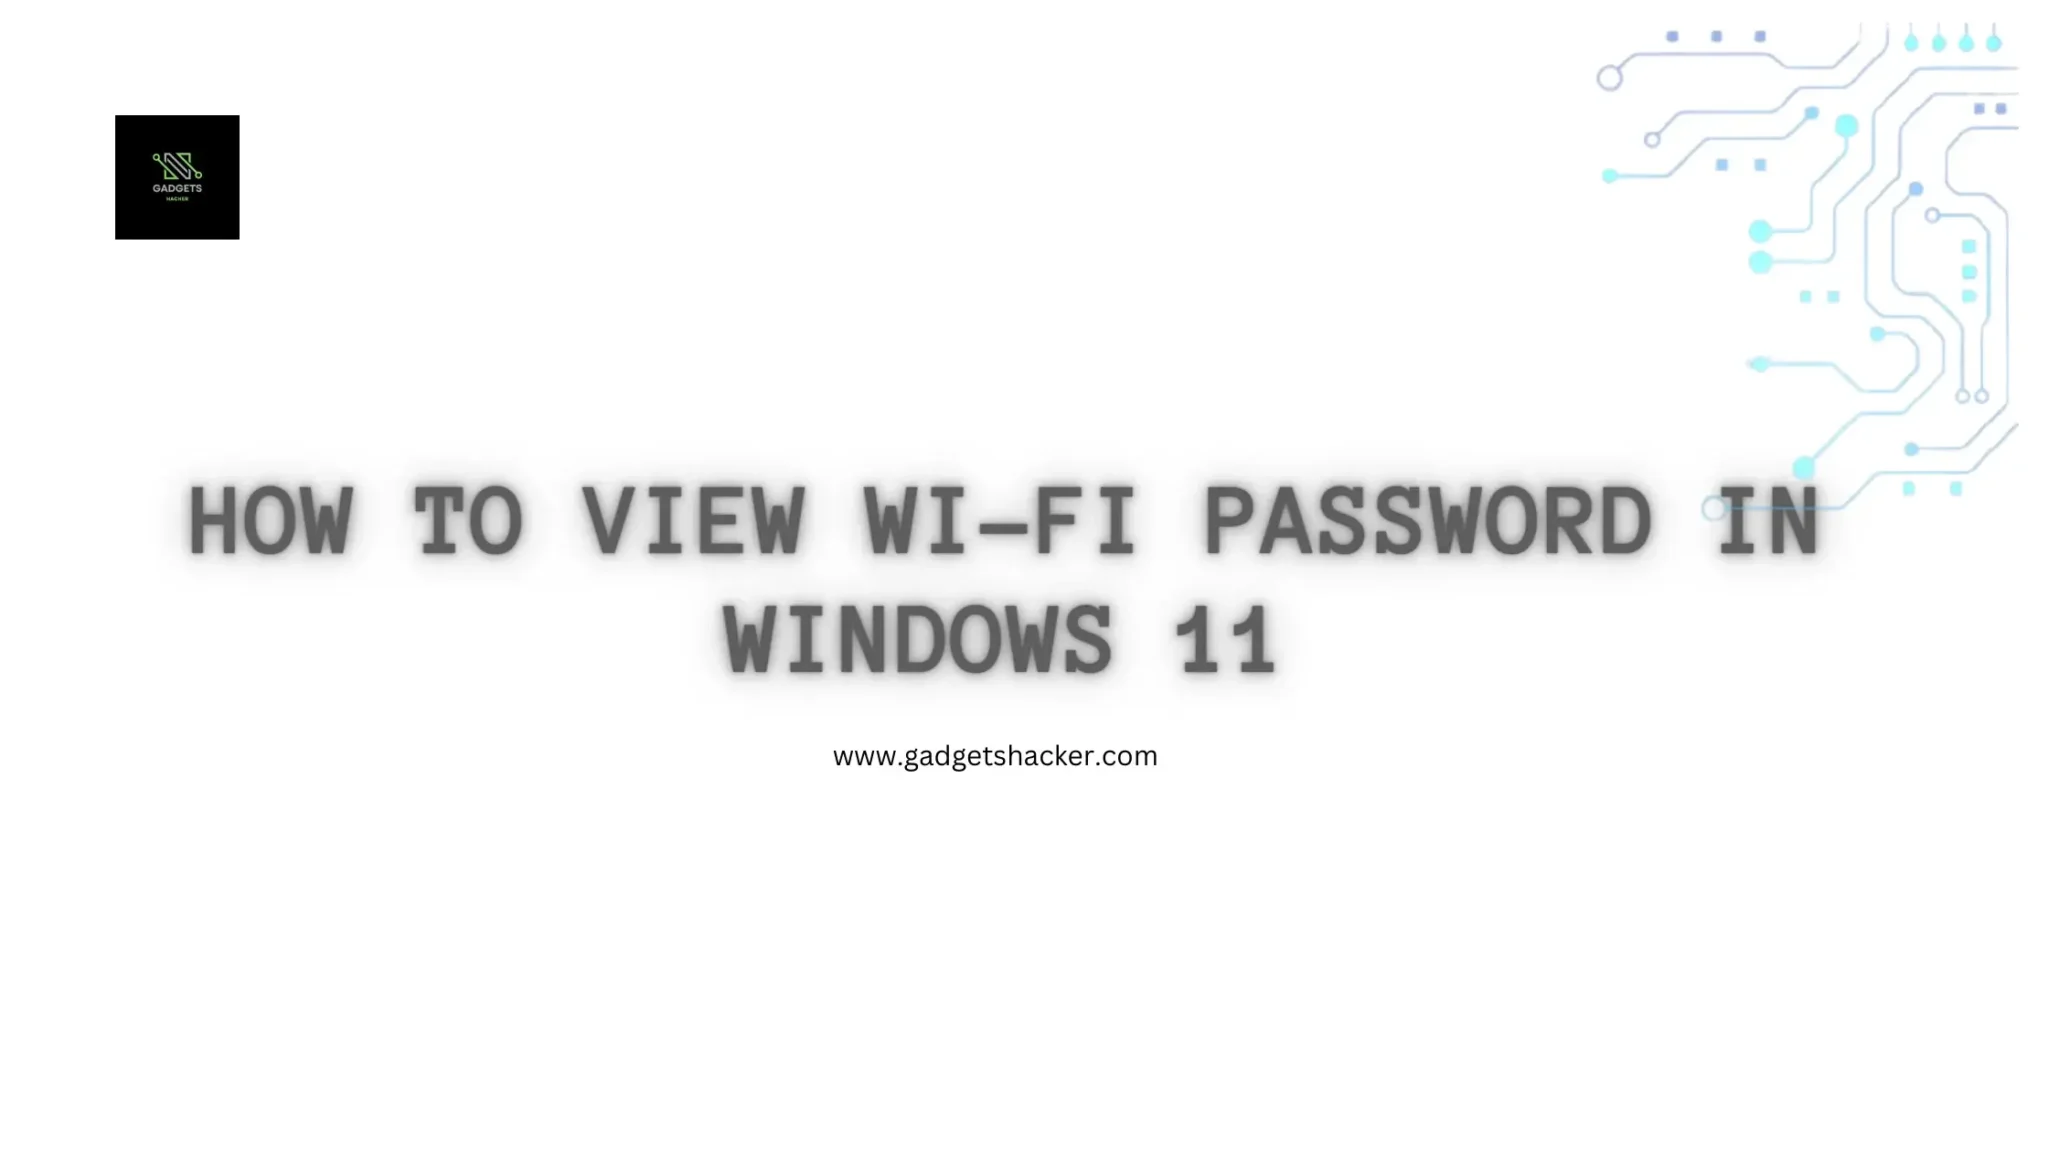 How to view Wi-Fi password in Windows 11